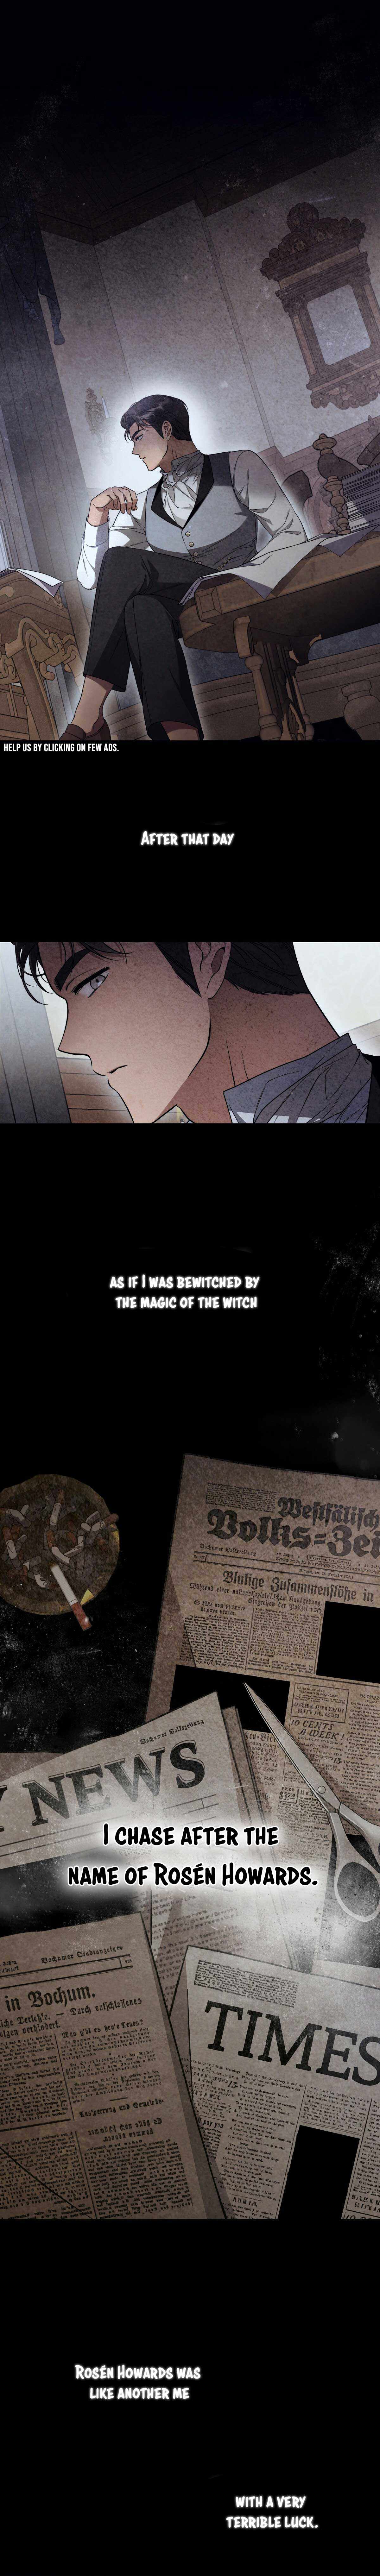 Your Eternal Lies - Page 1